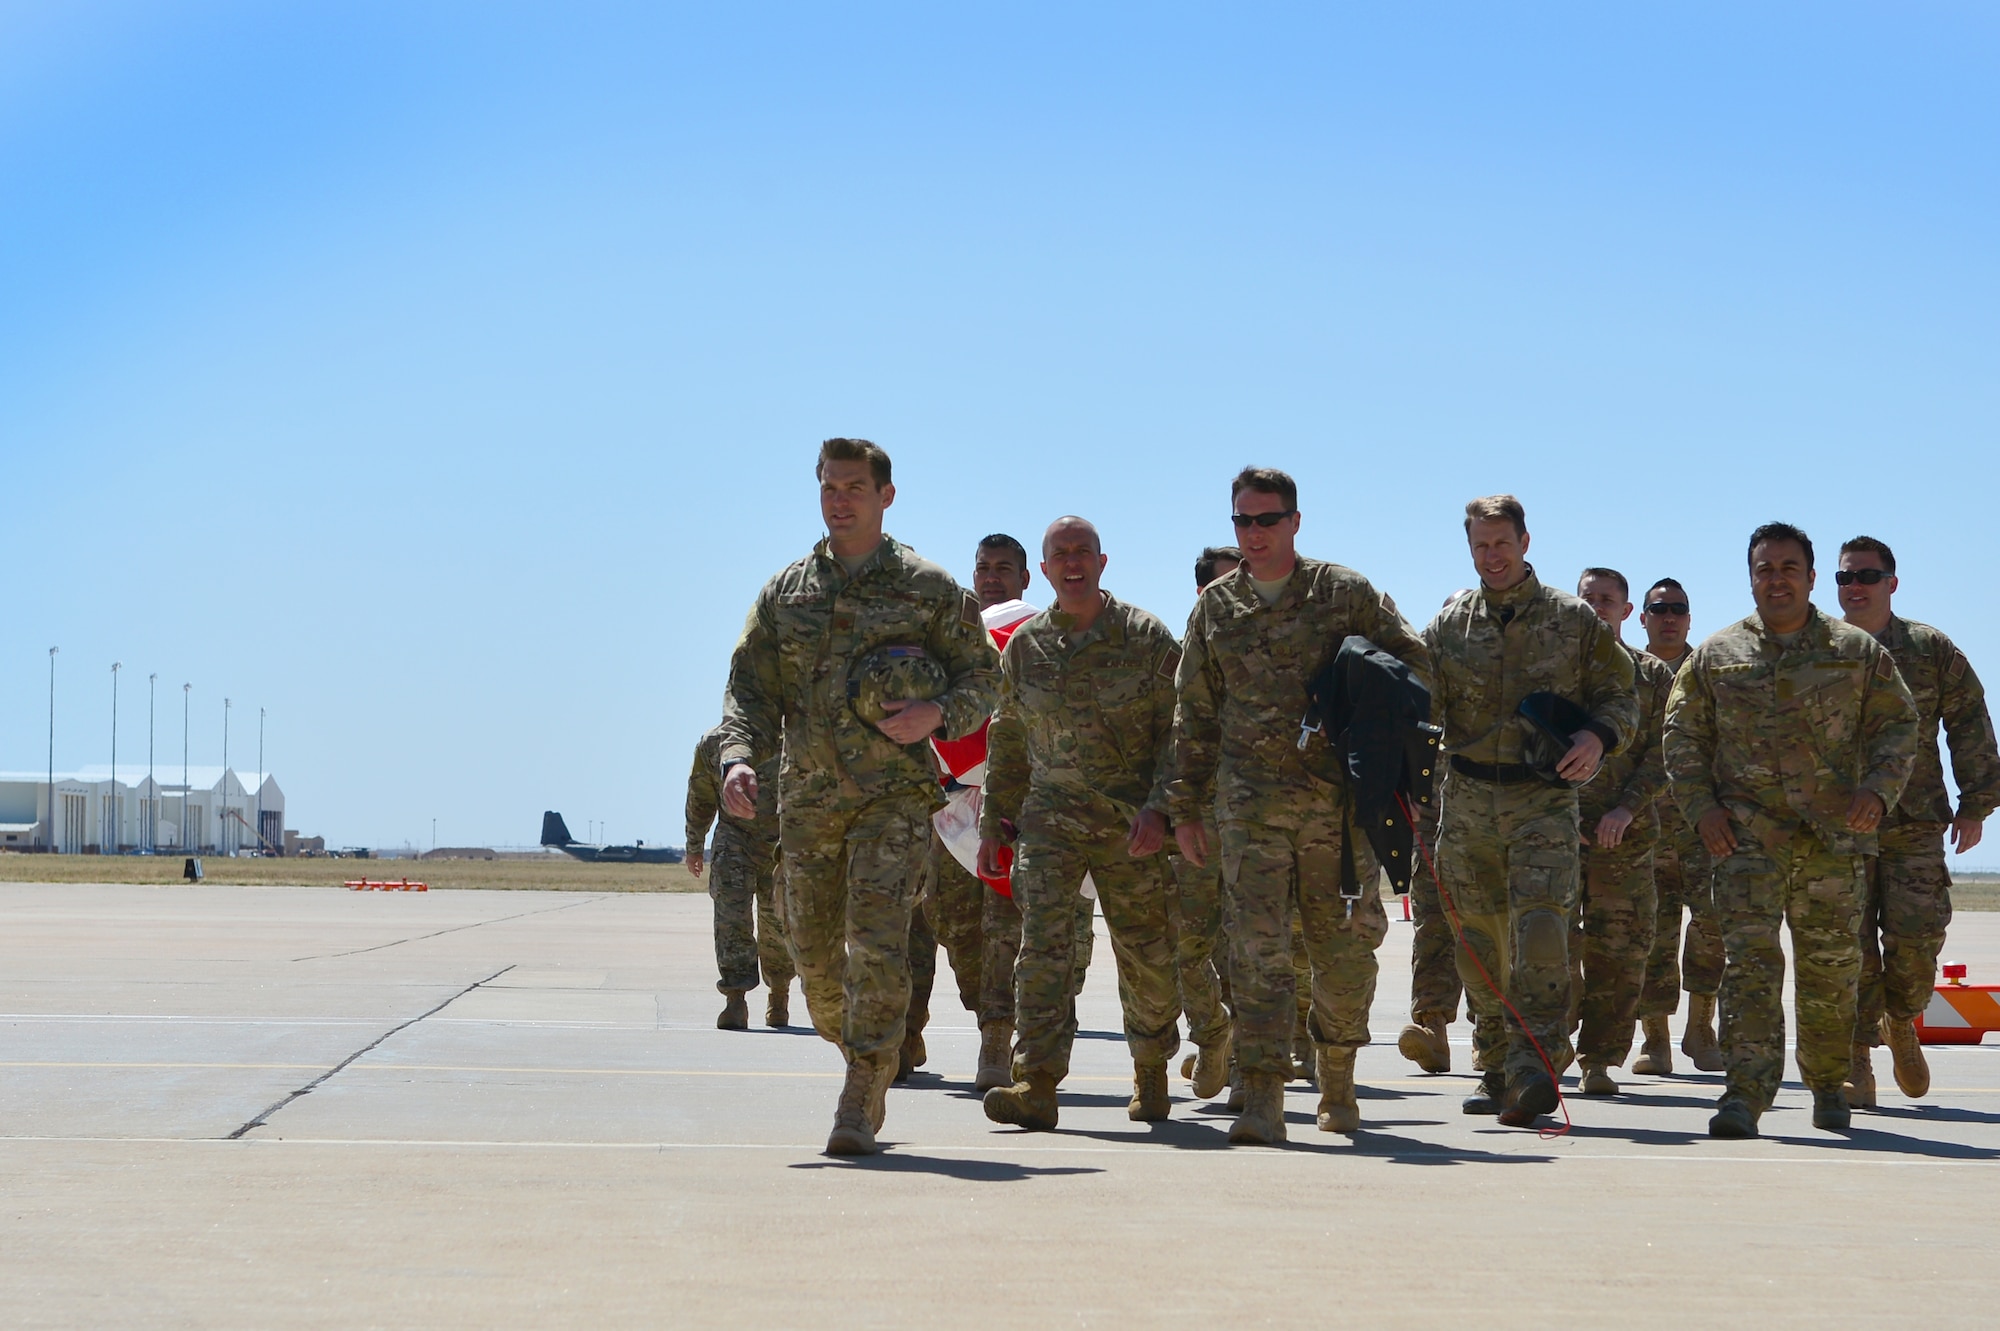 Members of the 26th Special Tactics Squadron walk across the flightline prior to a squadron activation ceremony, April 24, 2014 at Cannon Air Force Base, N.M. The 26 STS, formerly Detachment 1 of the 720th Special Tactics Group, Hurlburt Field, Fla., is a newly activated squadron based at Cannon. (U.S. Air Force photo/ Senior Airman Eboni Reece)